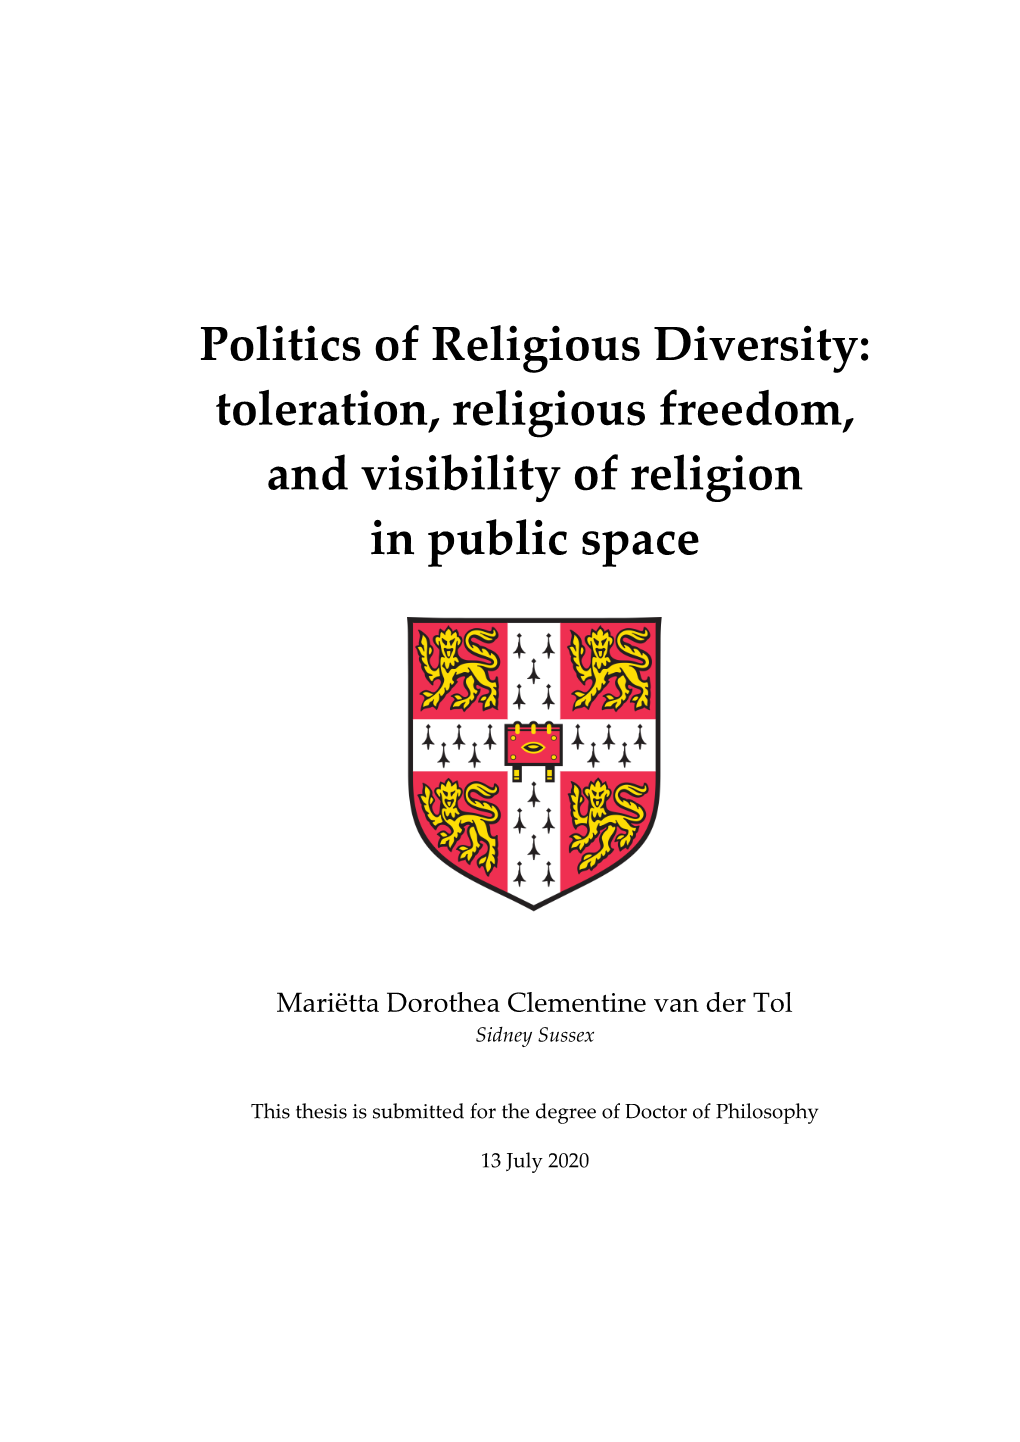 Politics of Religious Diversity: Toleration, Religious Freedom, and Visibility of Religion in Public Space